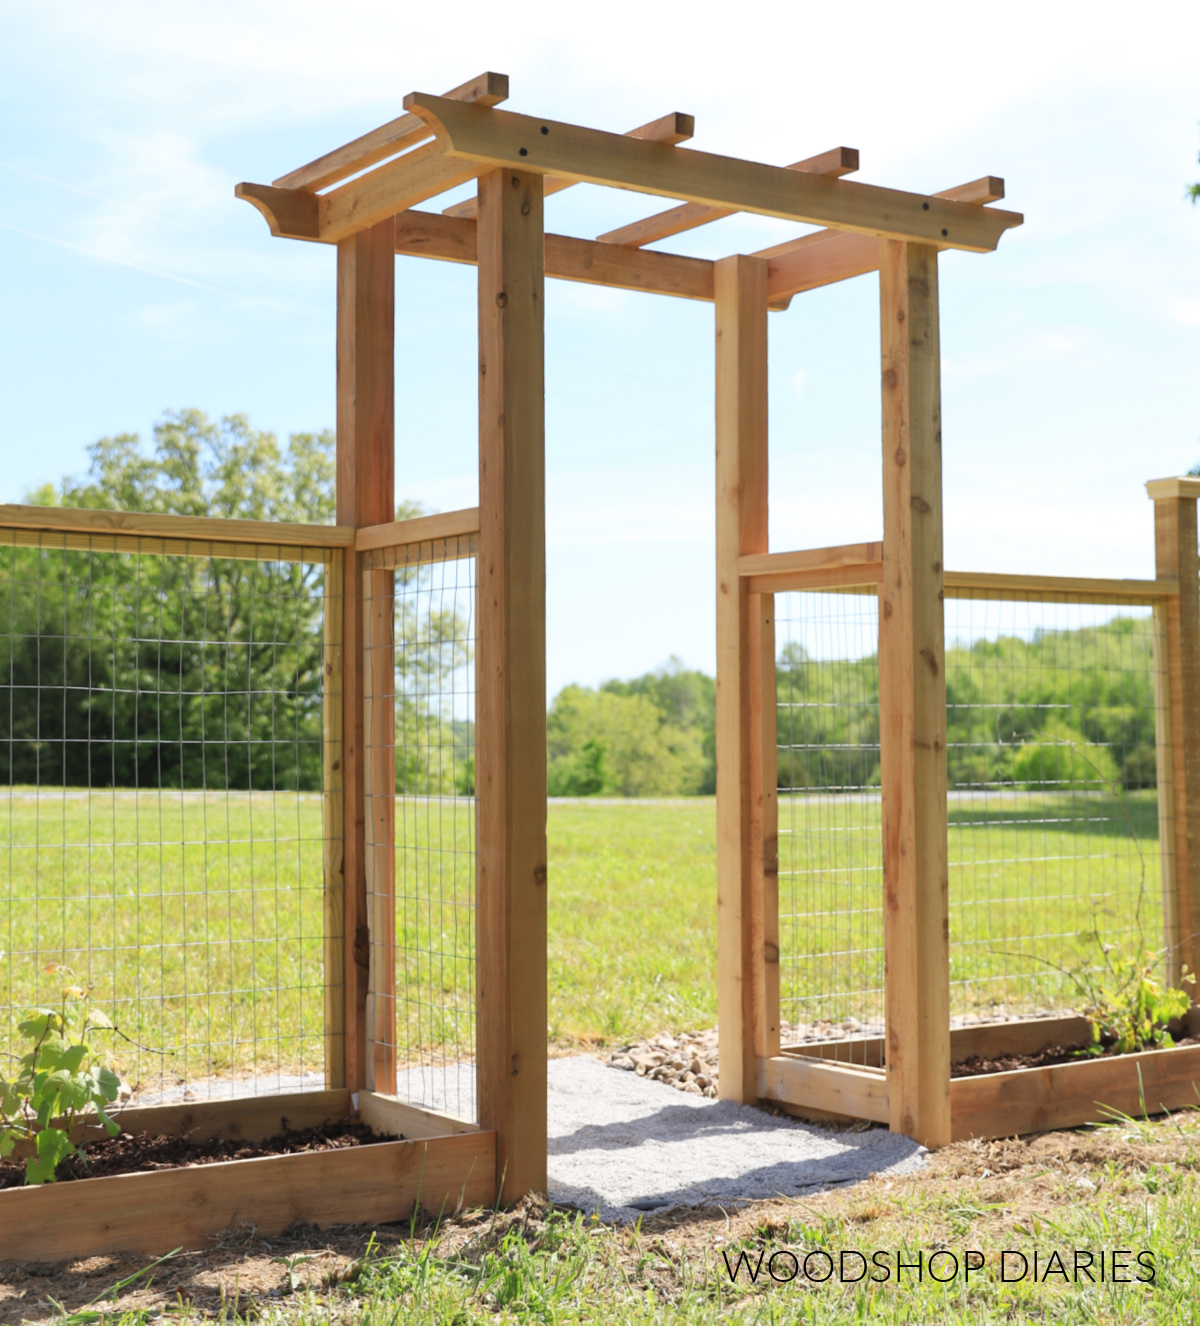 Cedar garden arbor with pergola style top with raised garden beds on each side with welded wire fencing panels